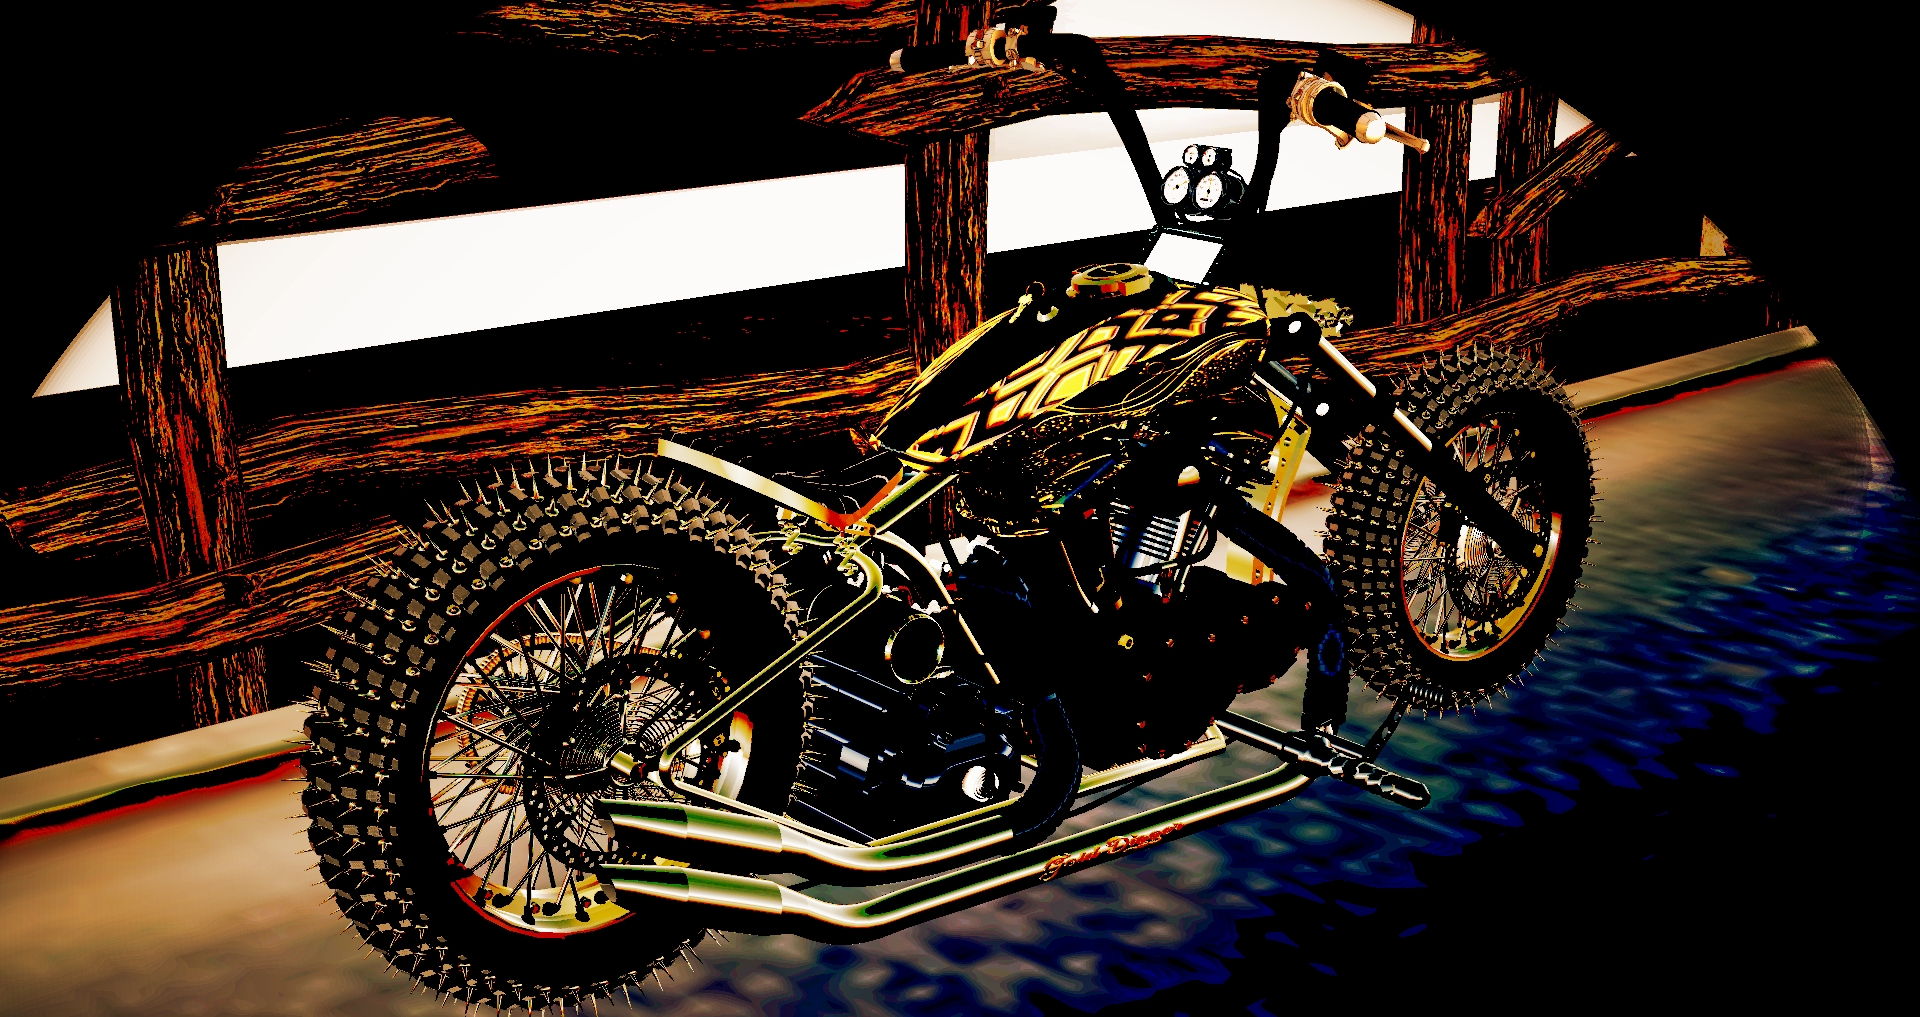 Bike Built In Virtual World - In Second Life